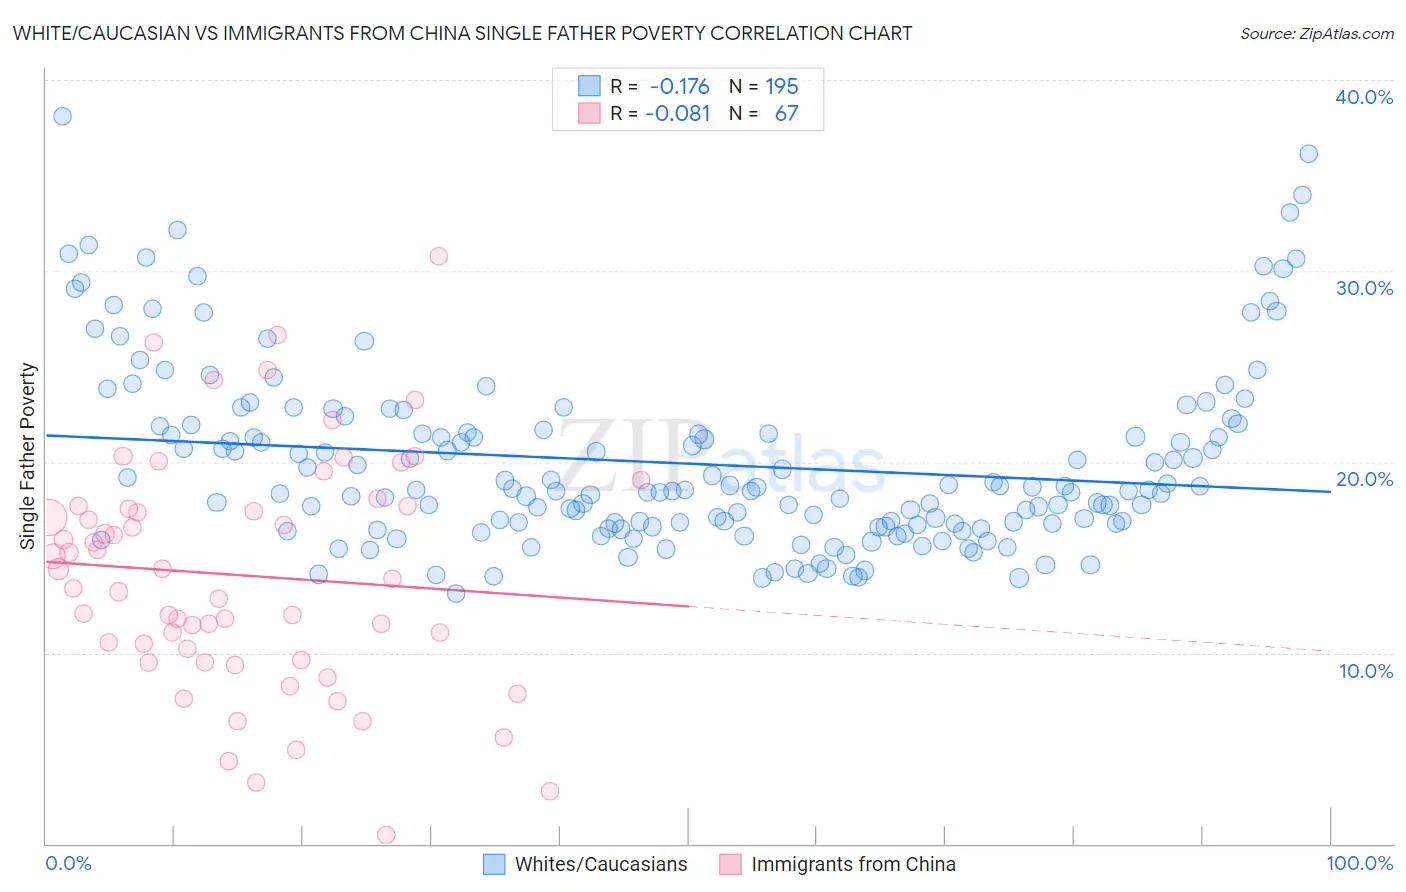 White/Caucasian vs Immigrants from China Single Father Poverty